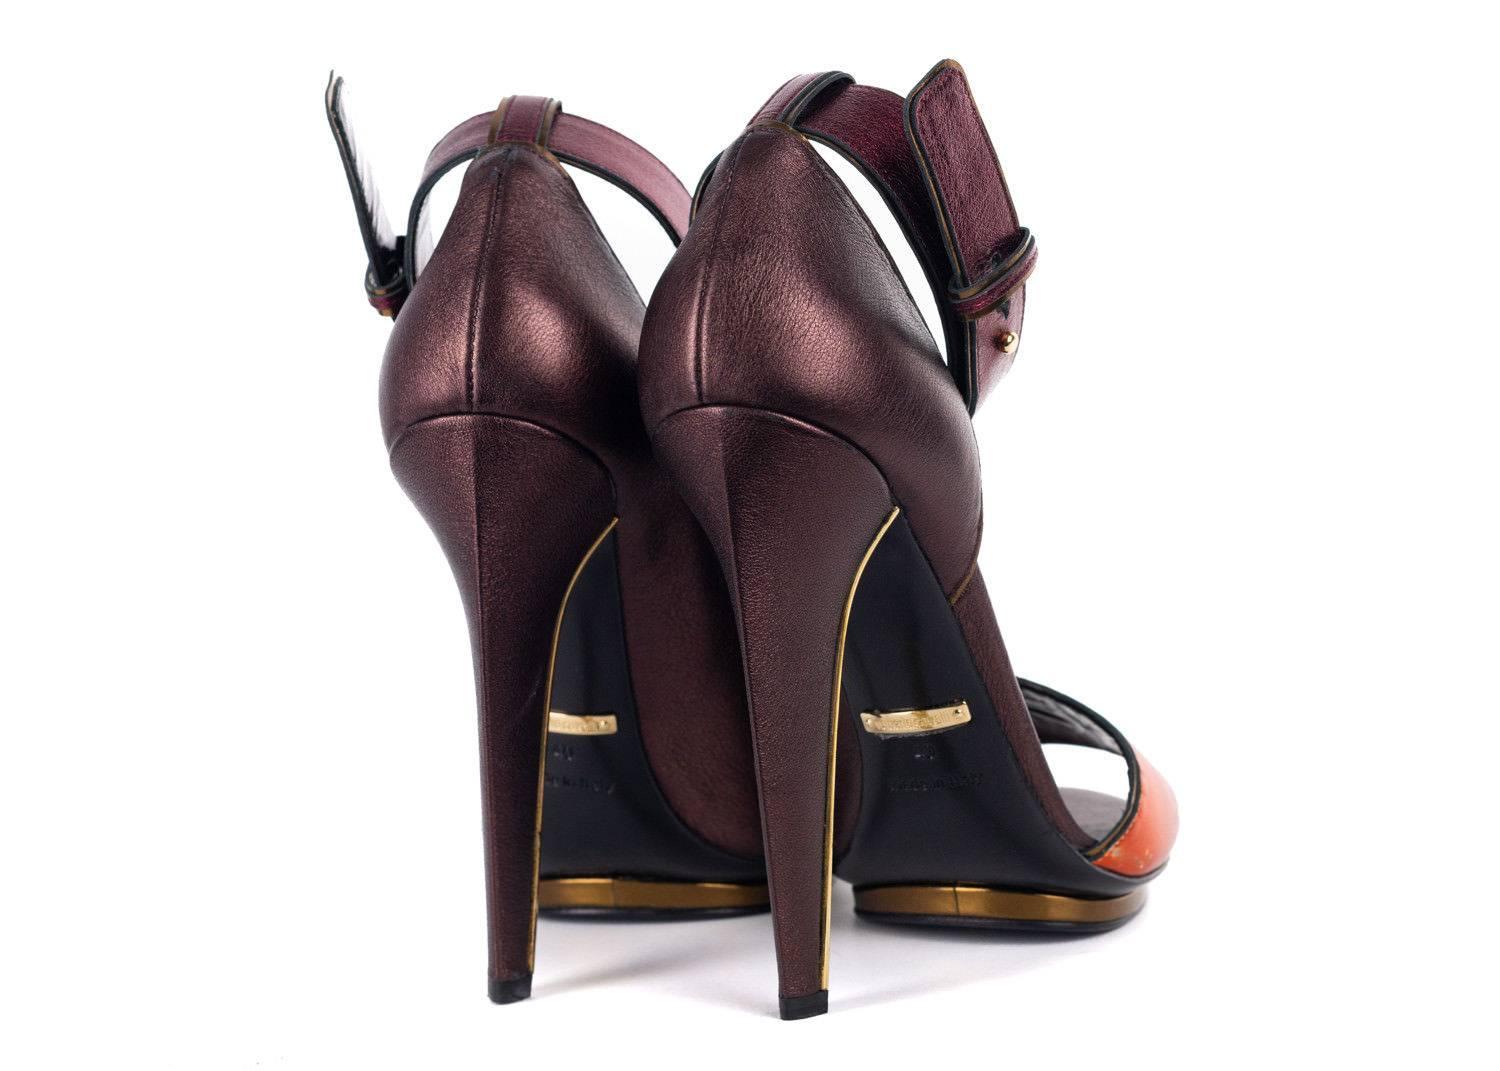 New without Original Box

Retails in Stores and Online $185

Size European 40 US 10 Fits True To Size

the unforgettable statement in your Roberto Cavalli Pumps. This smooth shoe features rich Satin Brown,red, and orange leather, Gold striped